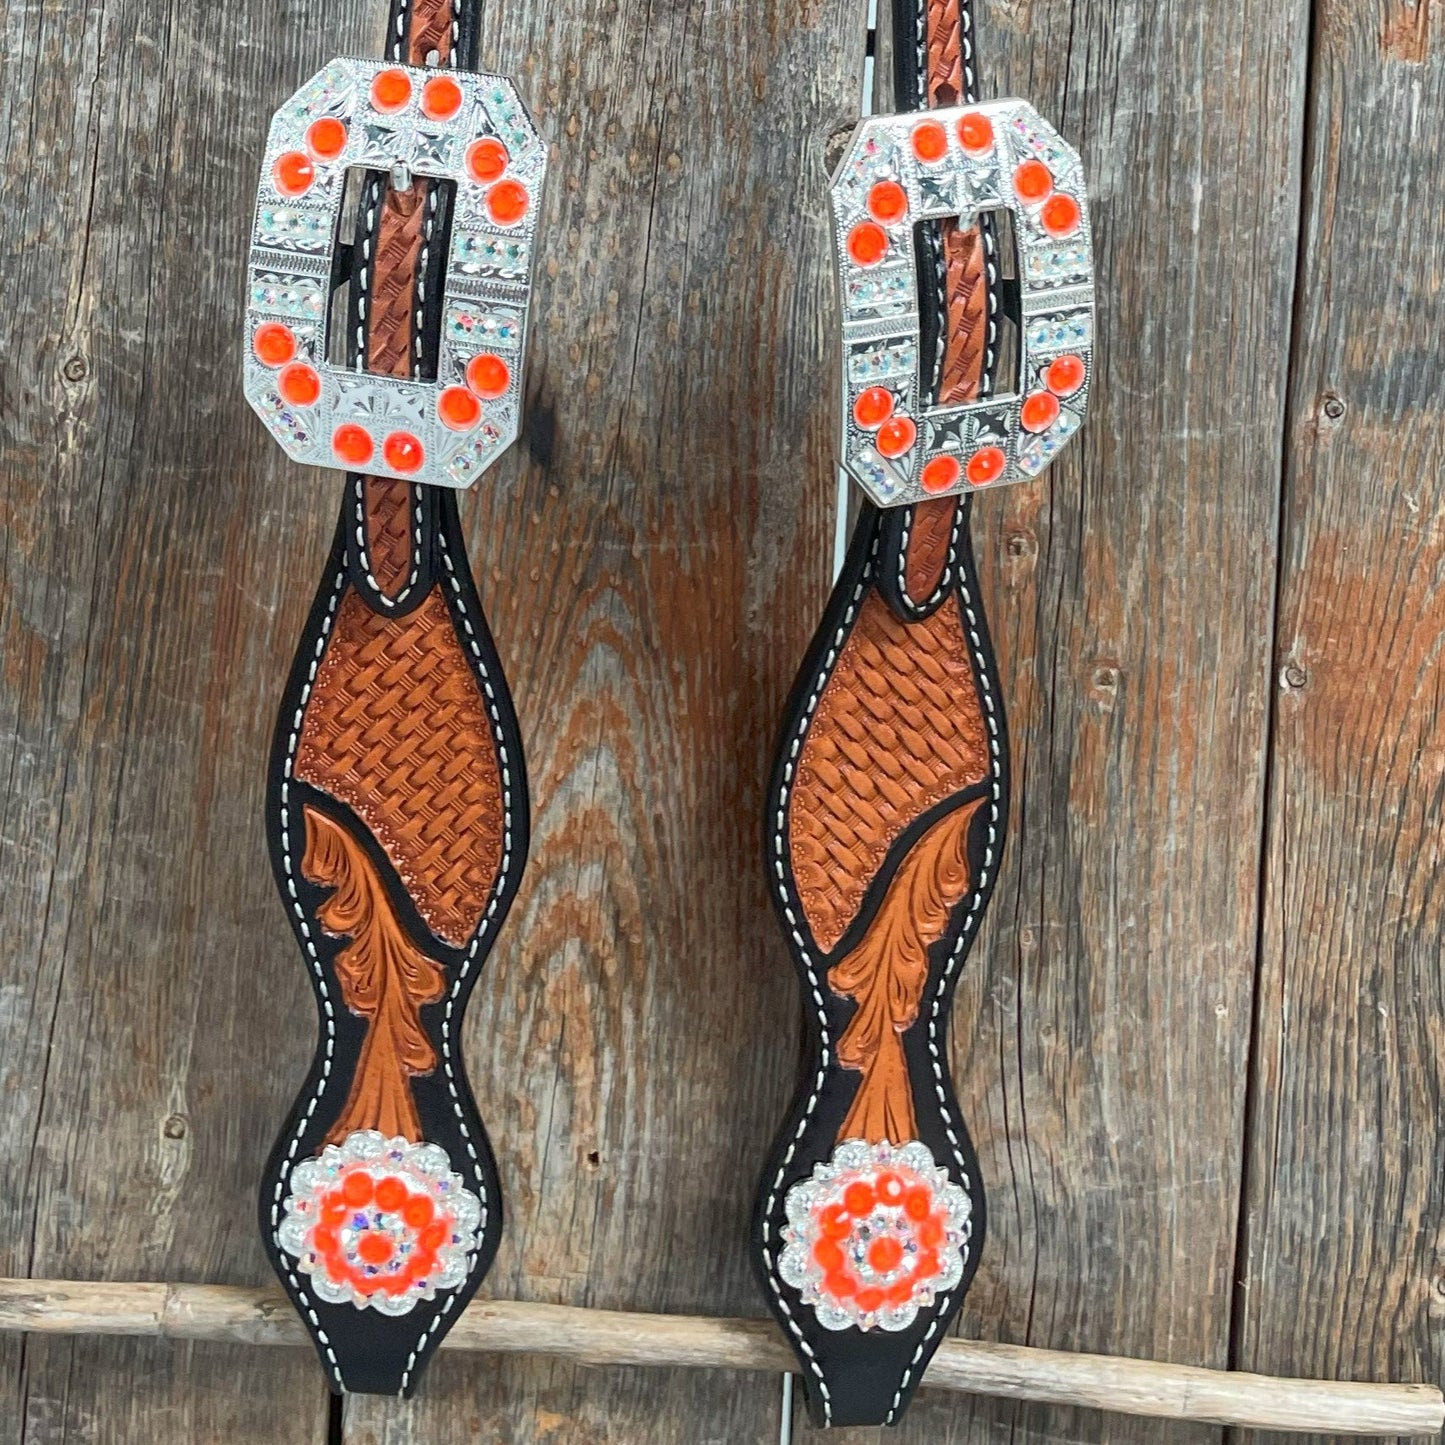 Two Tone Leaf Neon Orange Browband/One Ear Headstall & Breastcollar Tack Set #BBBC568